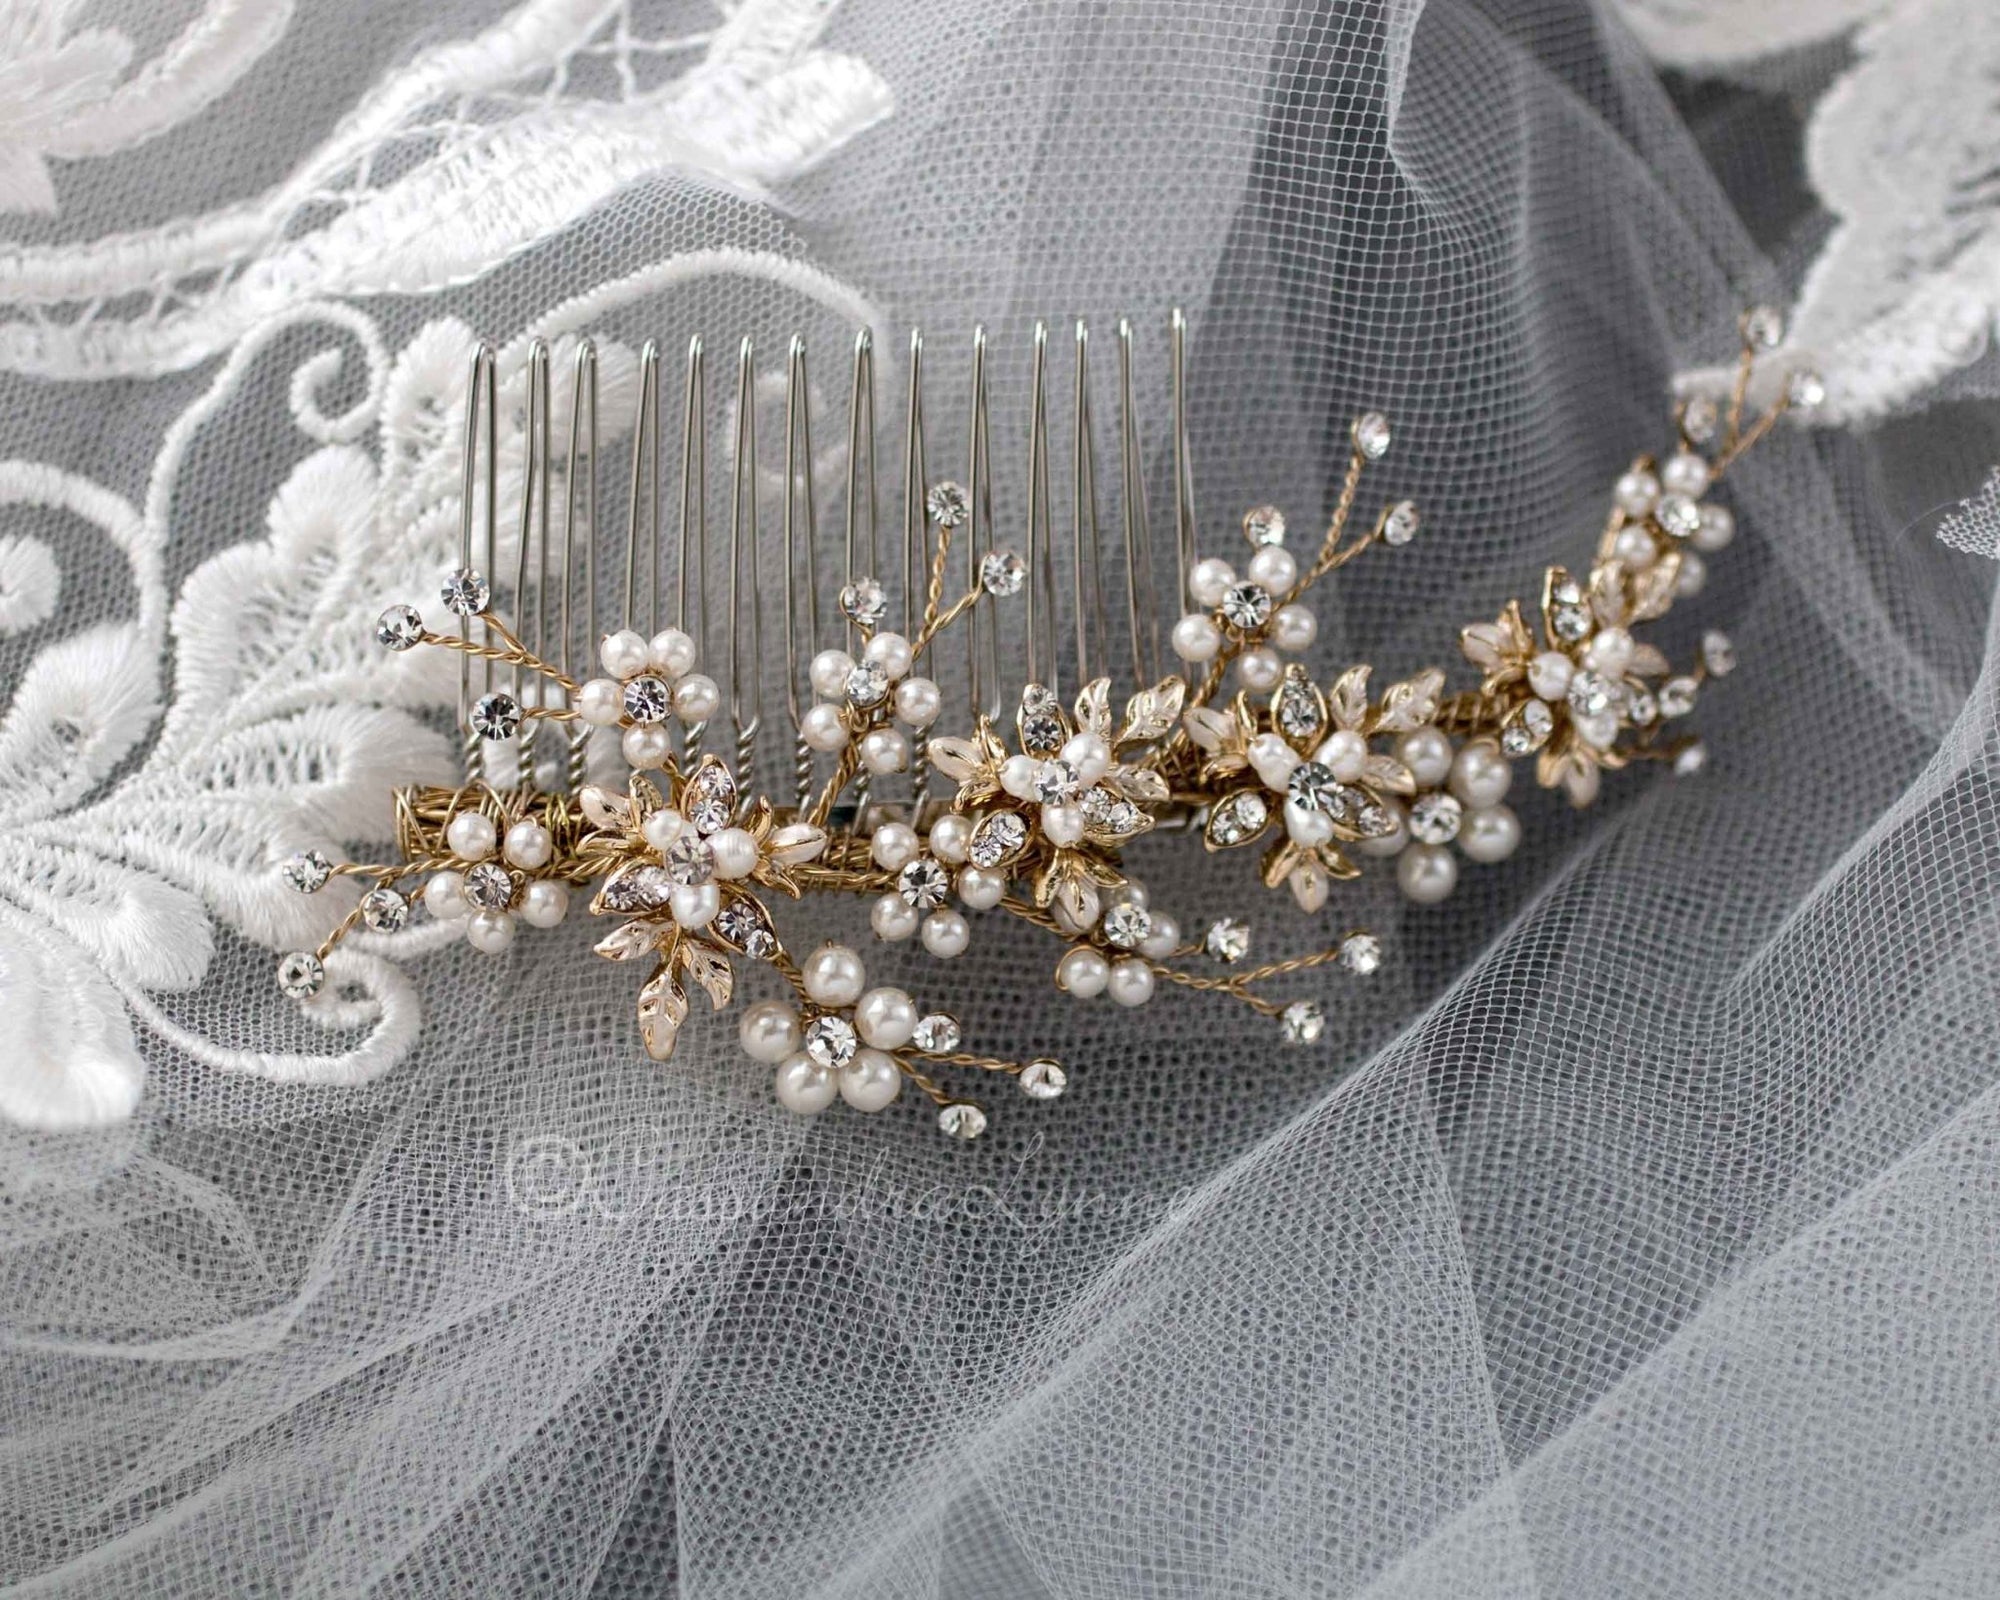 Delicate Wedding Hair Comb with Pearls - Cassandra Lynne